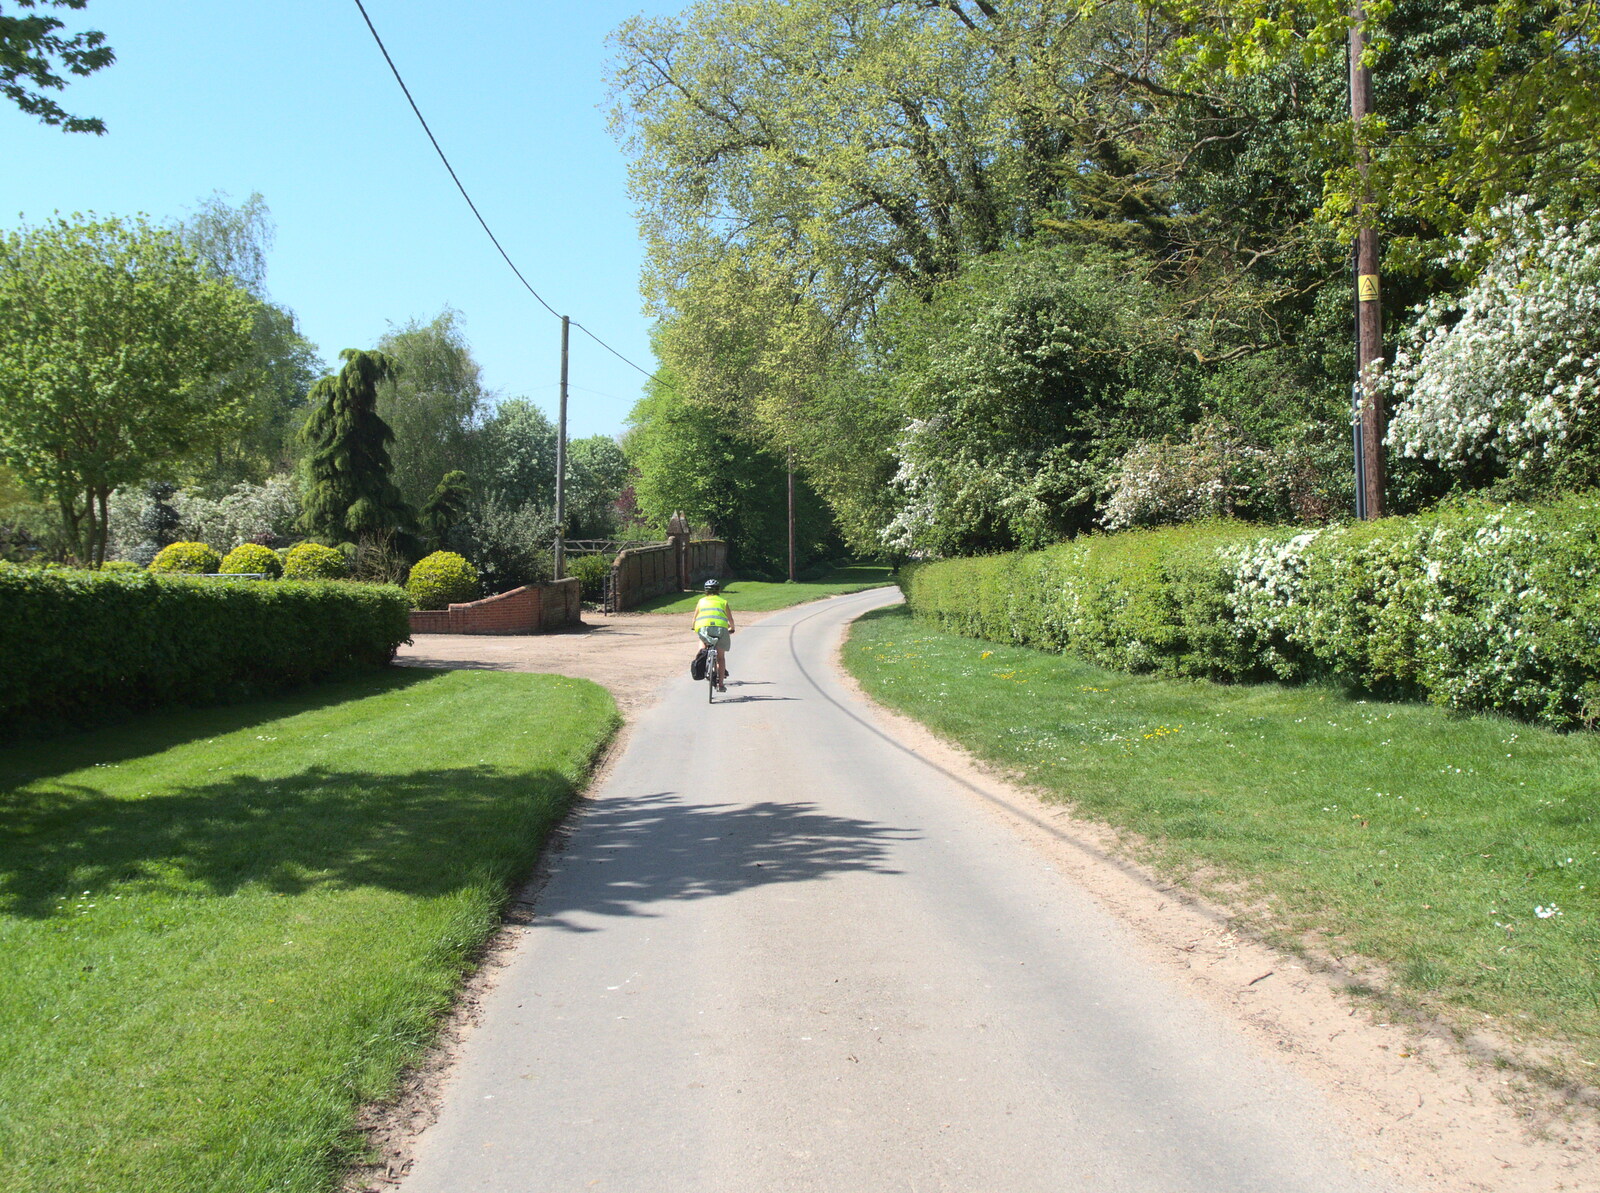 Isobel cycles past the church in Thrandeston from A Bike Ride to the Railway Tavern, Mellis, Suffolk - 7th May 2018